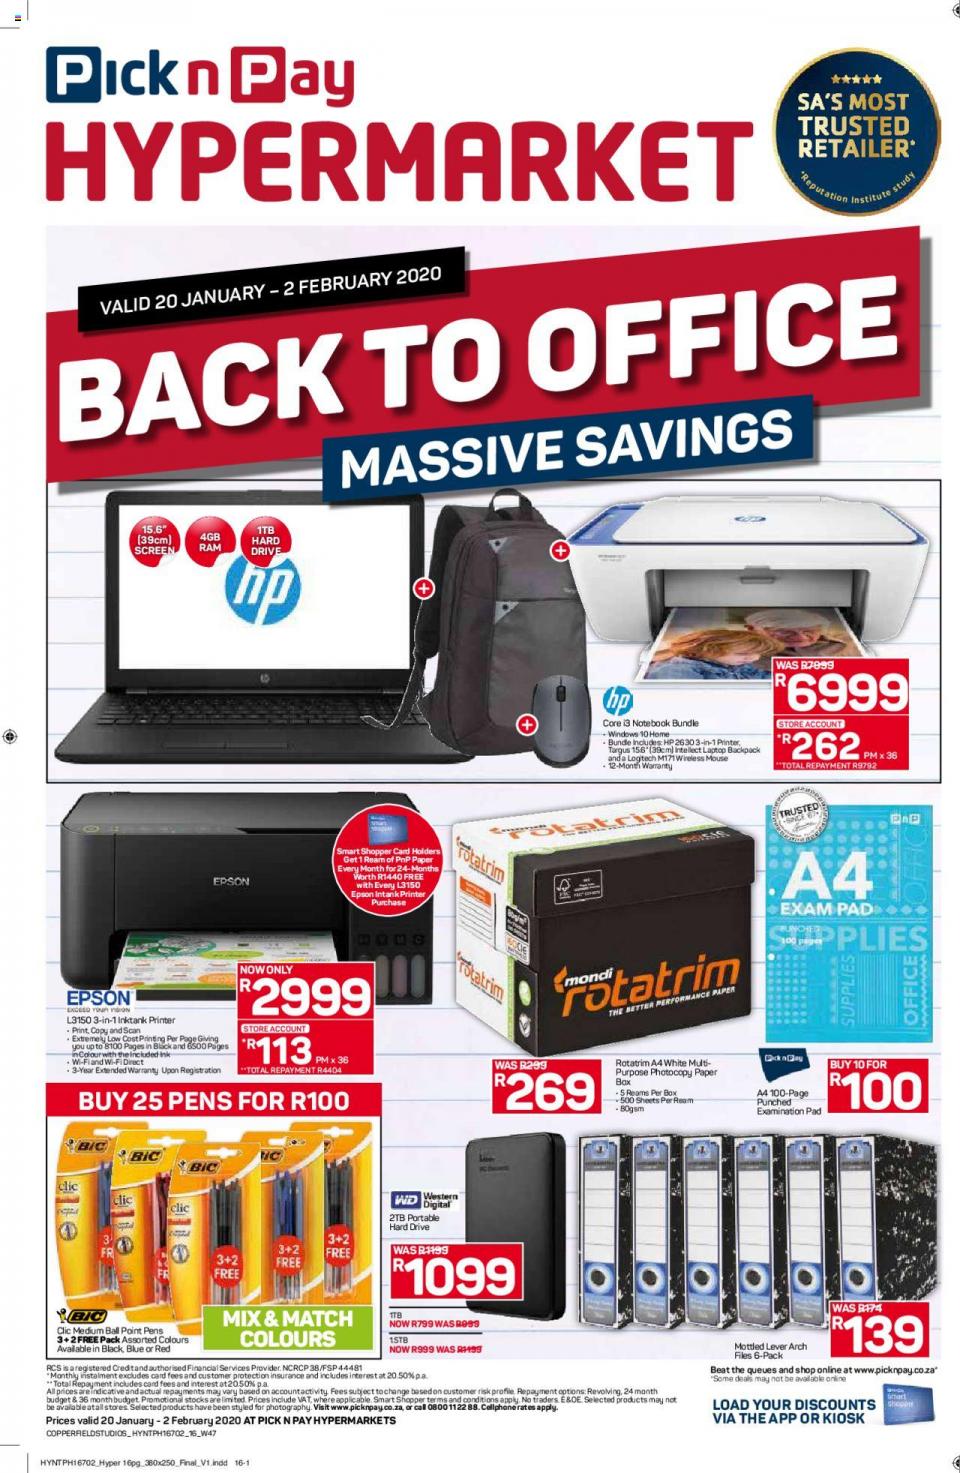 Pick n Pay Specials End Savings Hypermarkets 20 January 2020